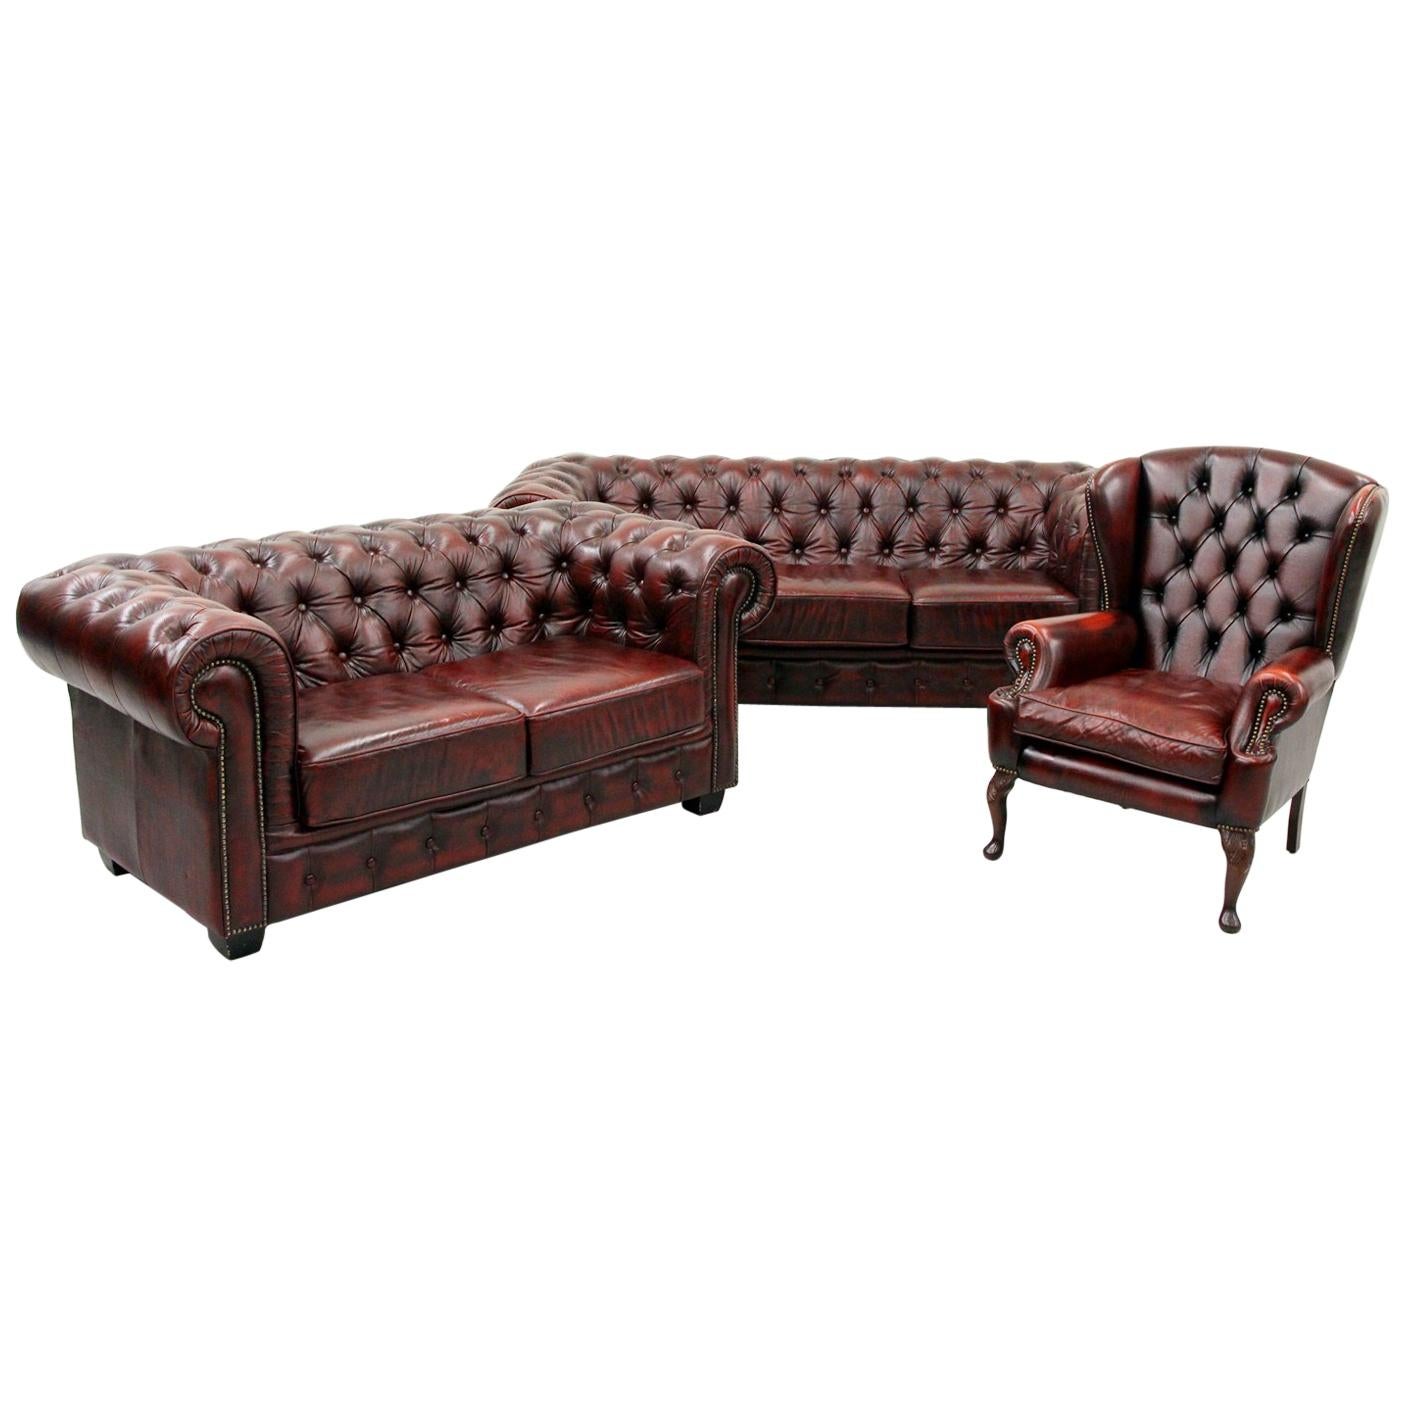 Chesterfield Sofa Leather Antique Vintage Couch English Armchair Old For Sale